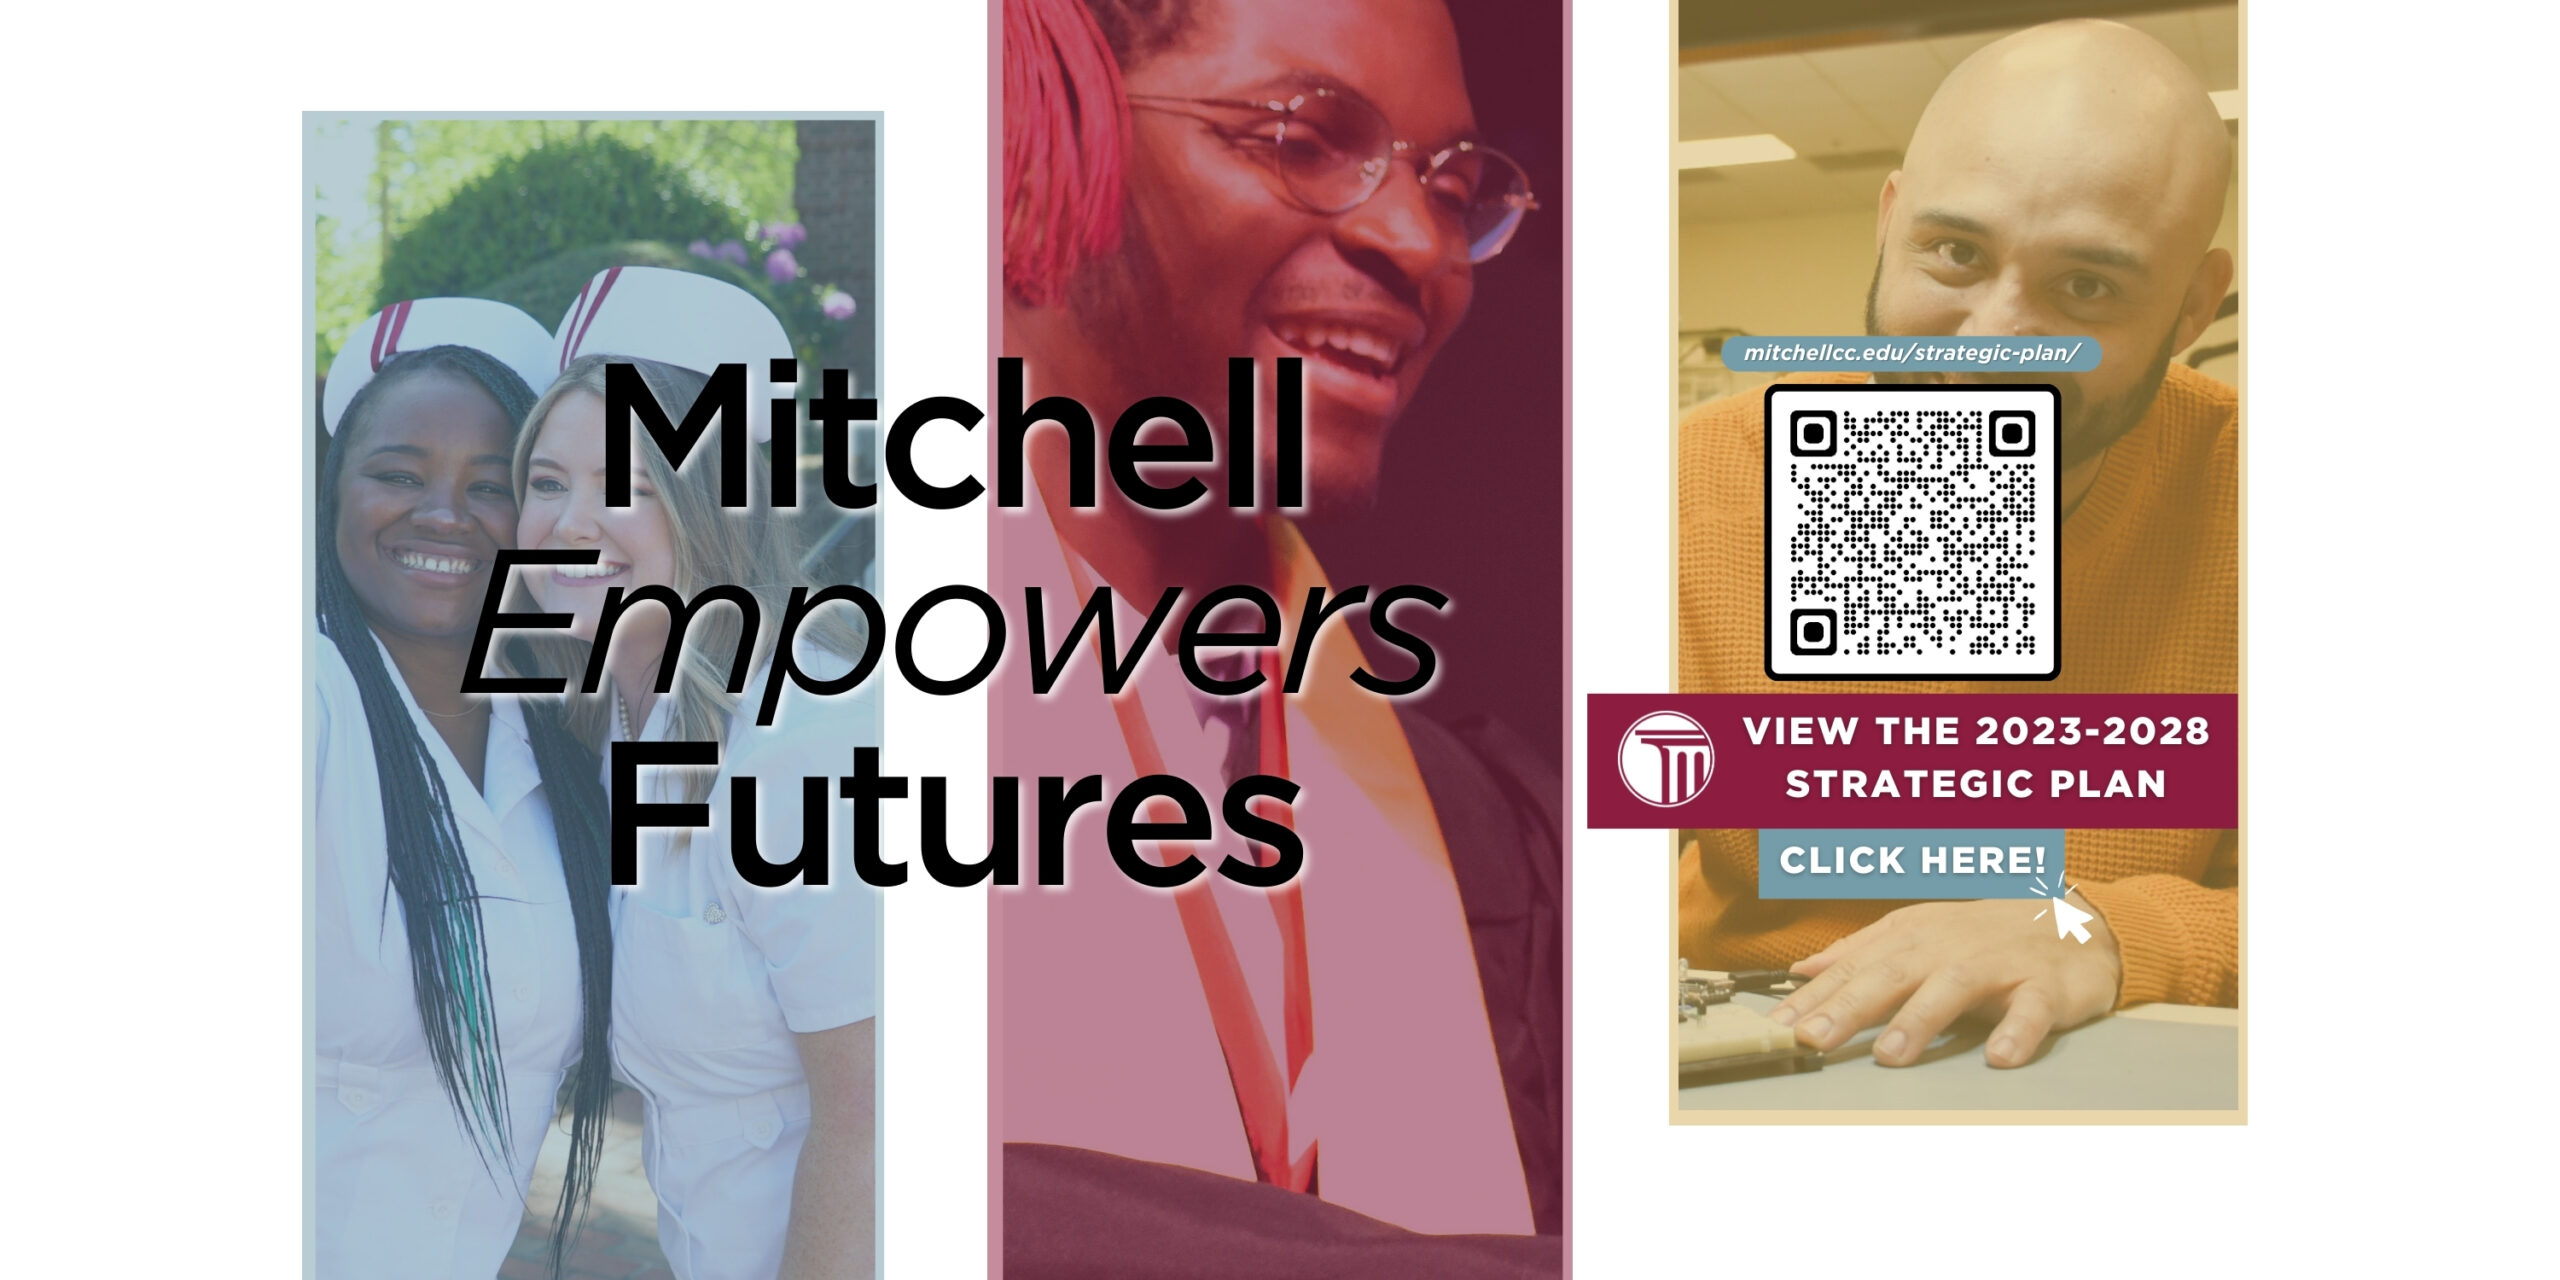 Banner that reads "Mitchell Empowers Futures". Click the banner or visit mitchellcc.edu/strategic-plan/ to view the 2023-2028 Strategic Plan.